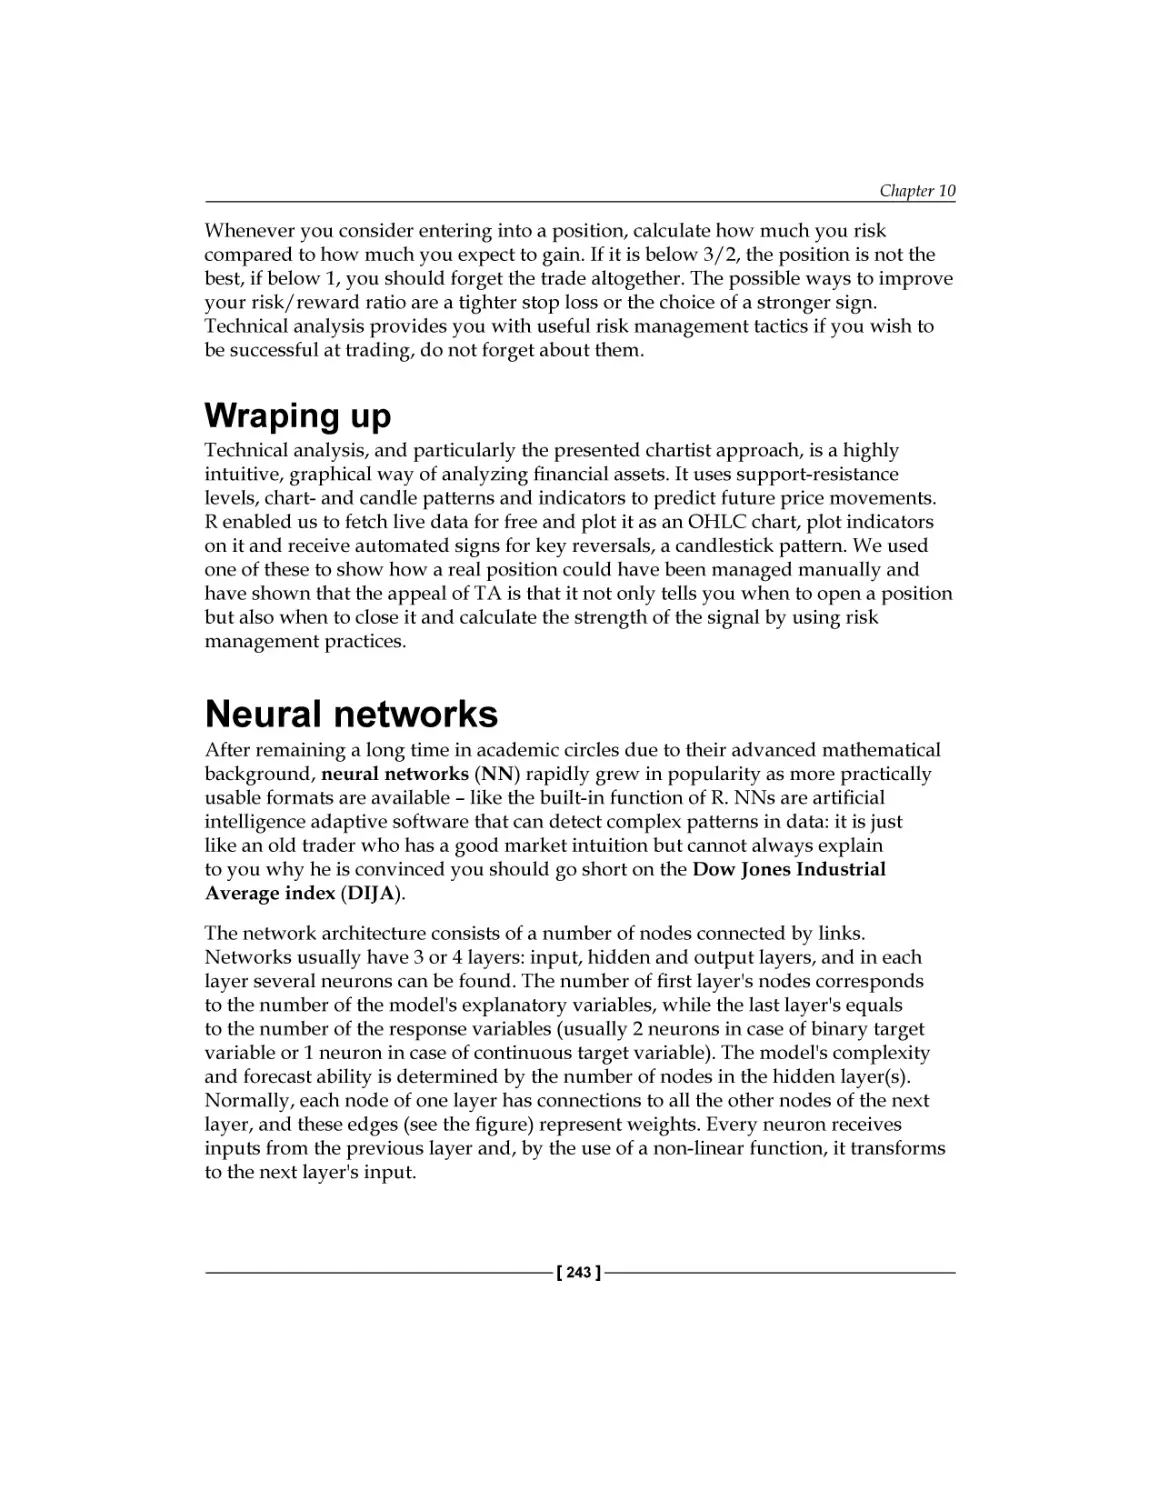 Wrap up
Neural networks